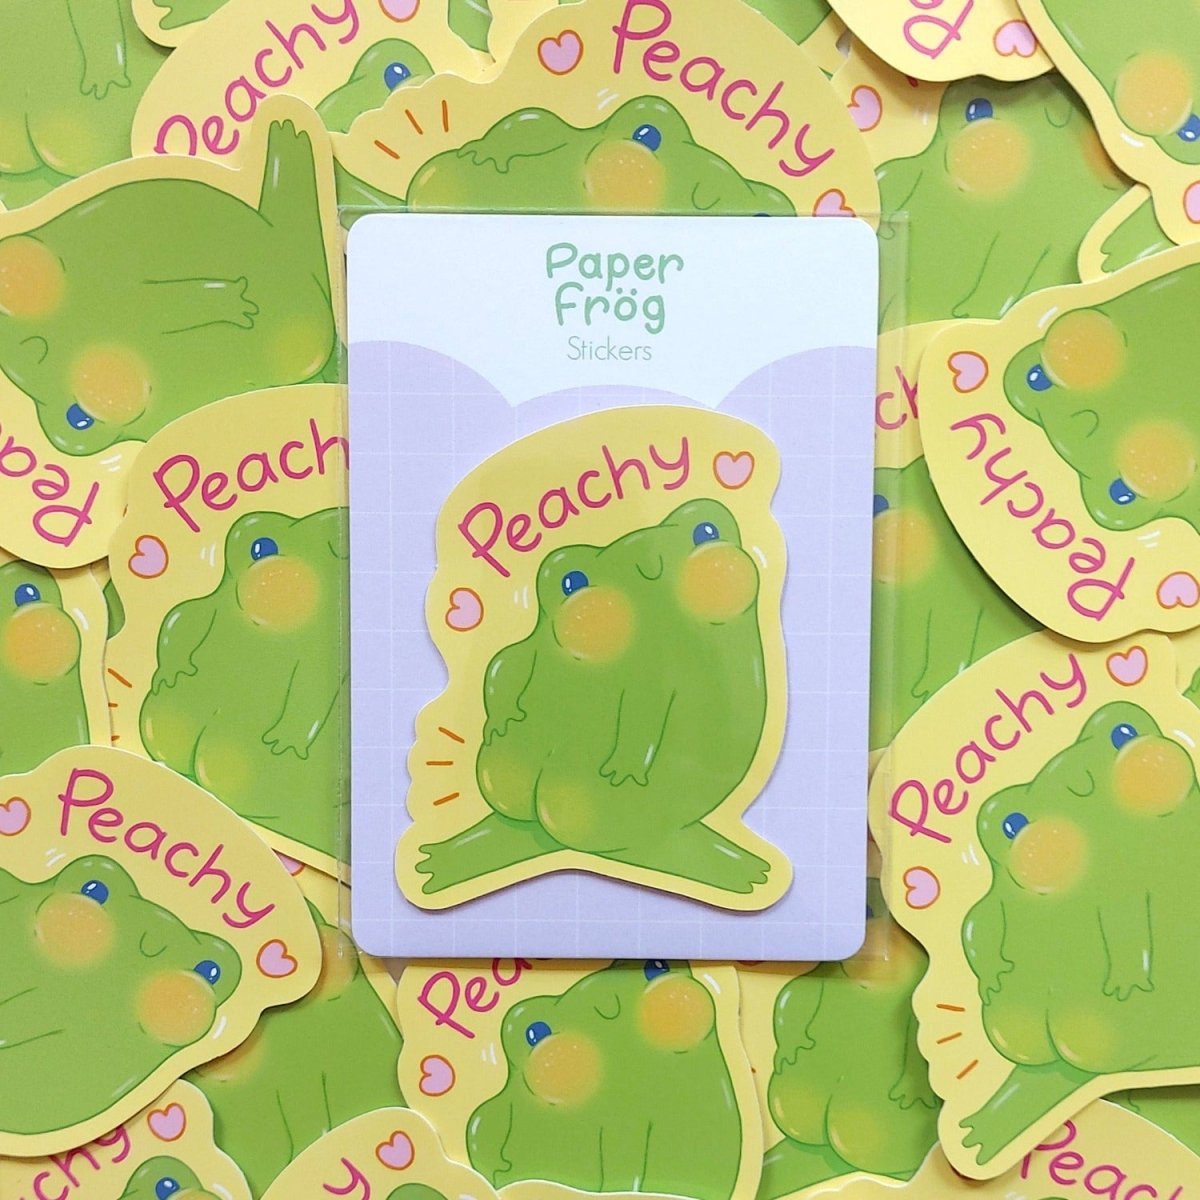 "Peachy Frog" glossy sticker - Paperfrog - Stickers